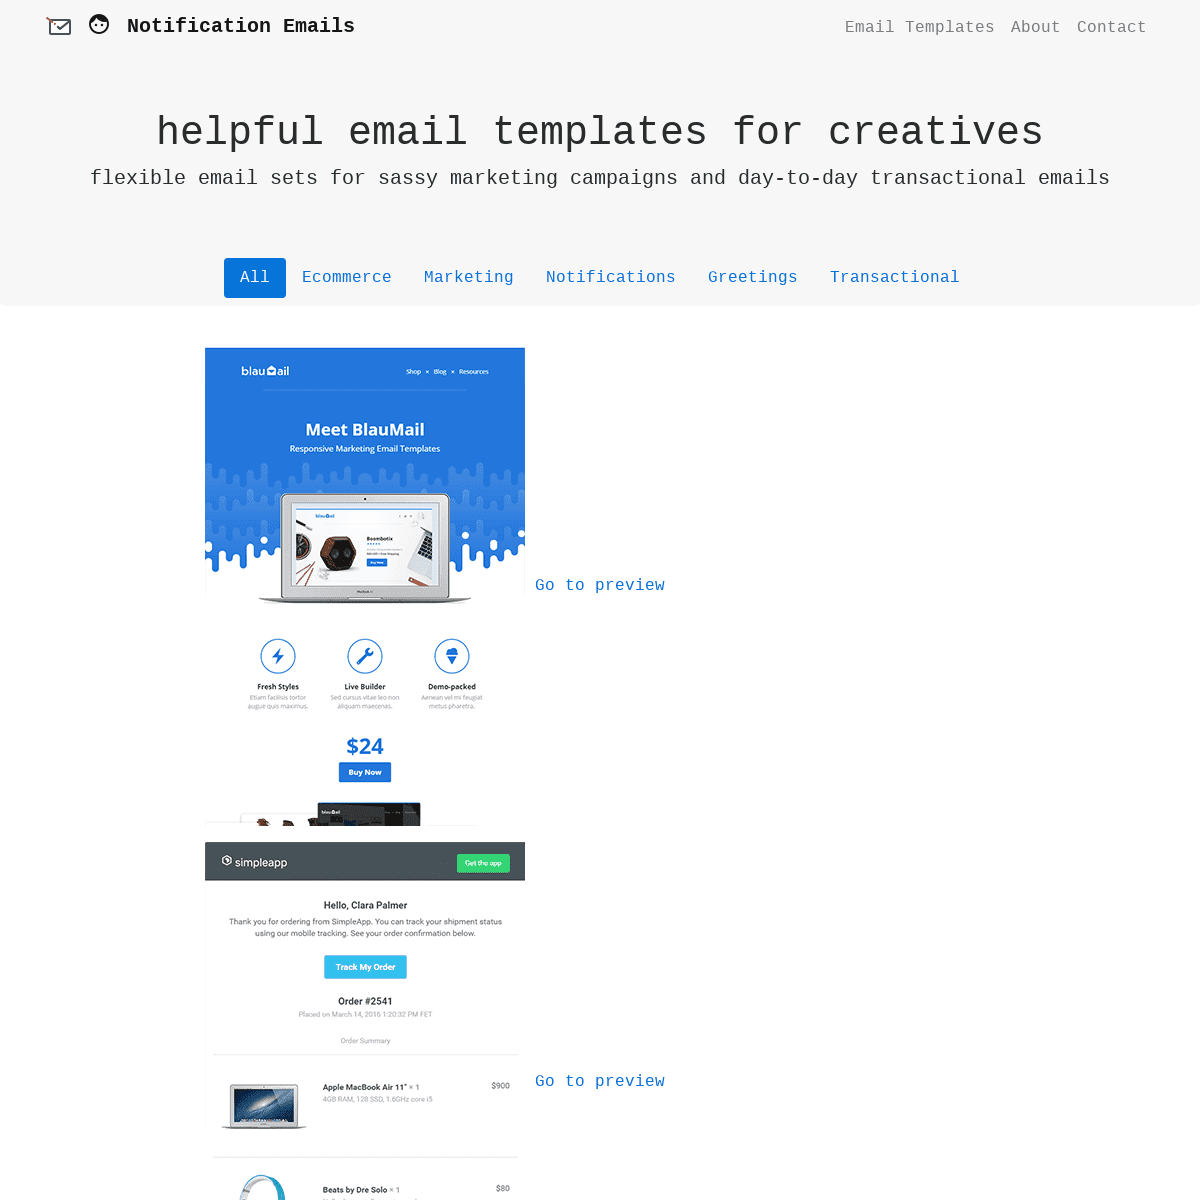 Notification Emails - Helpful email templates for creatives